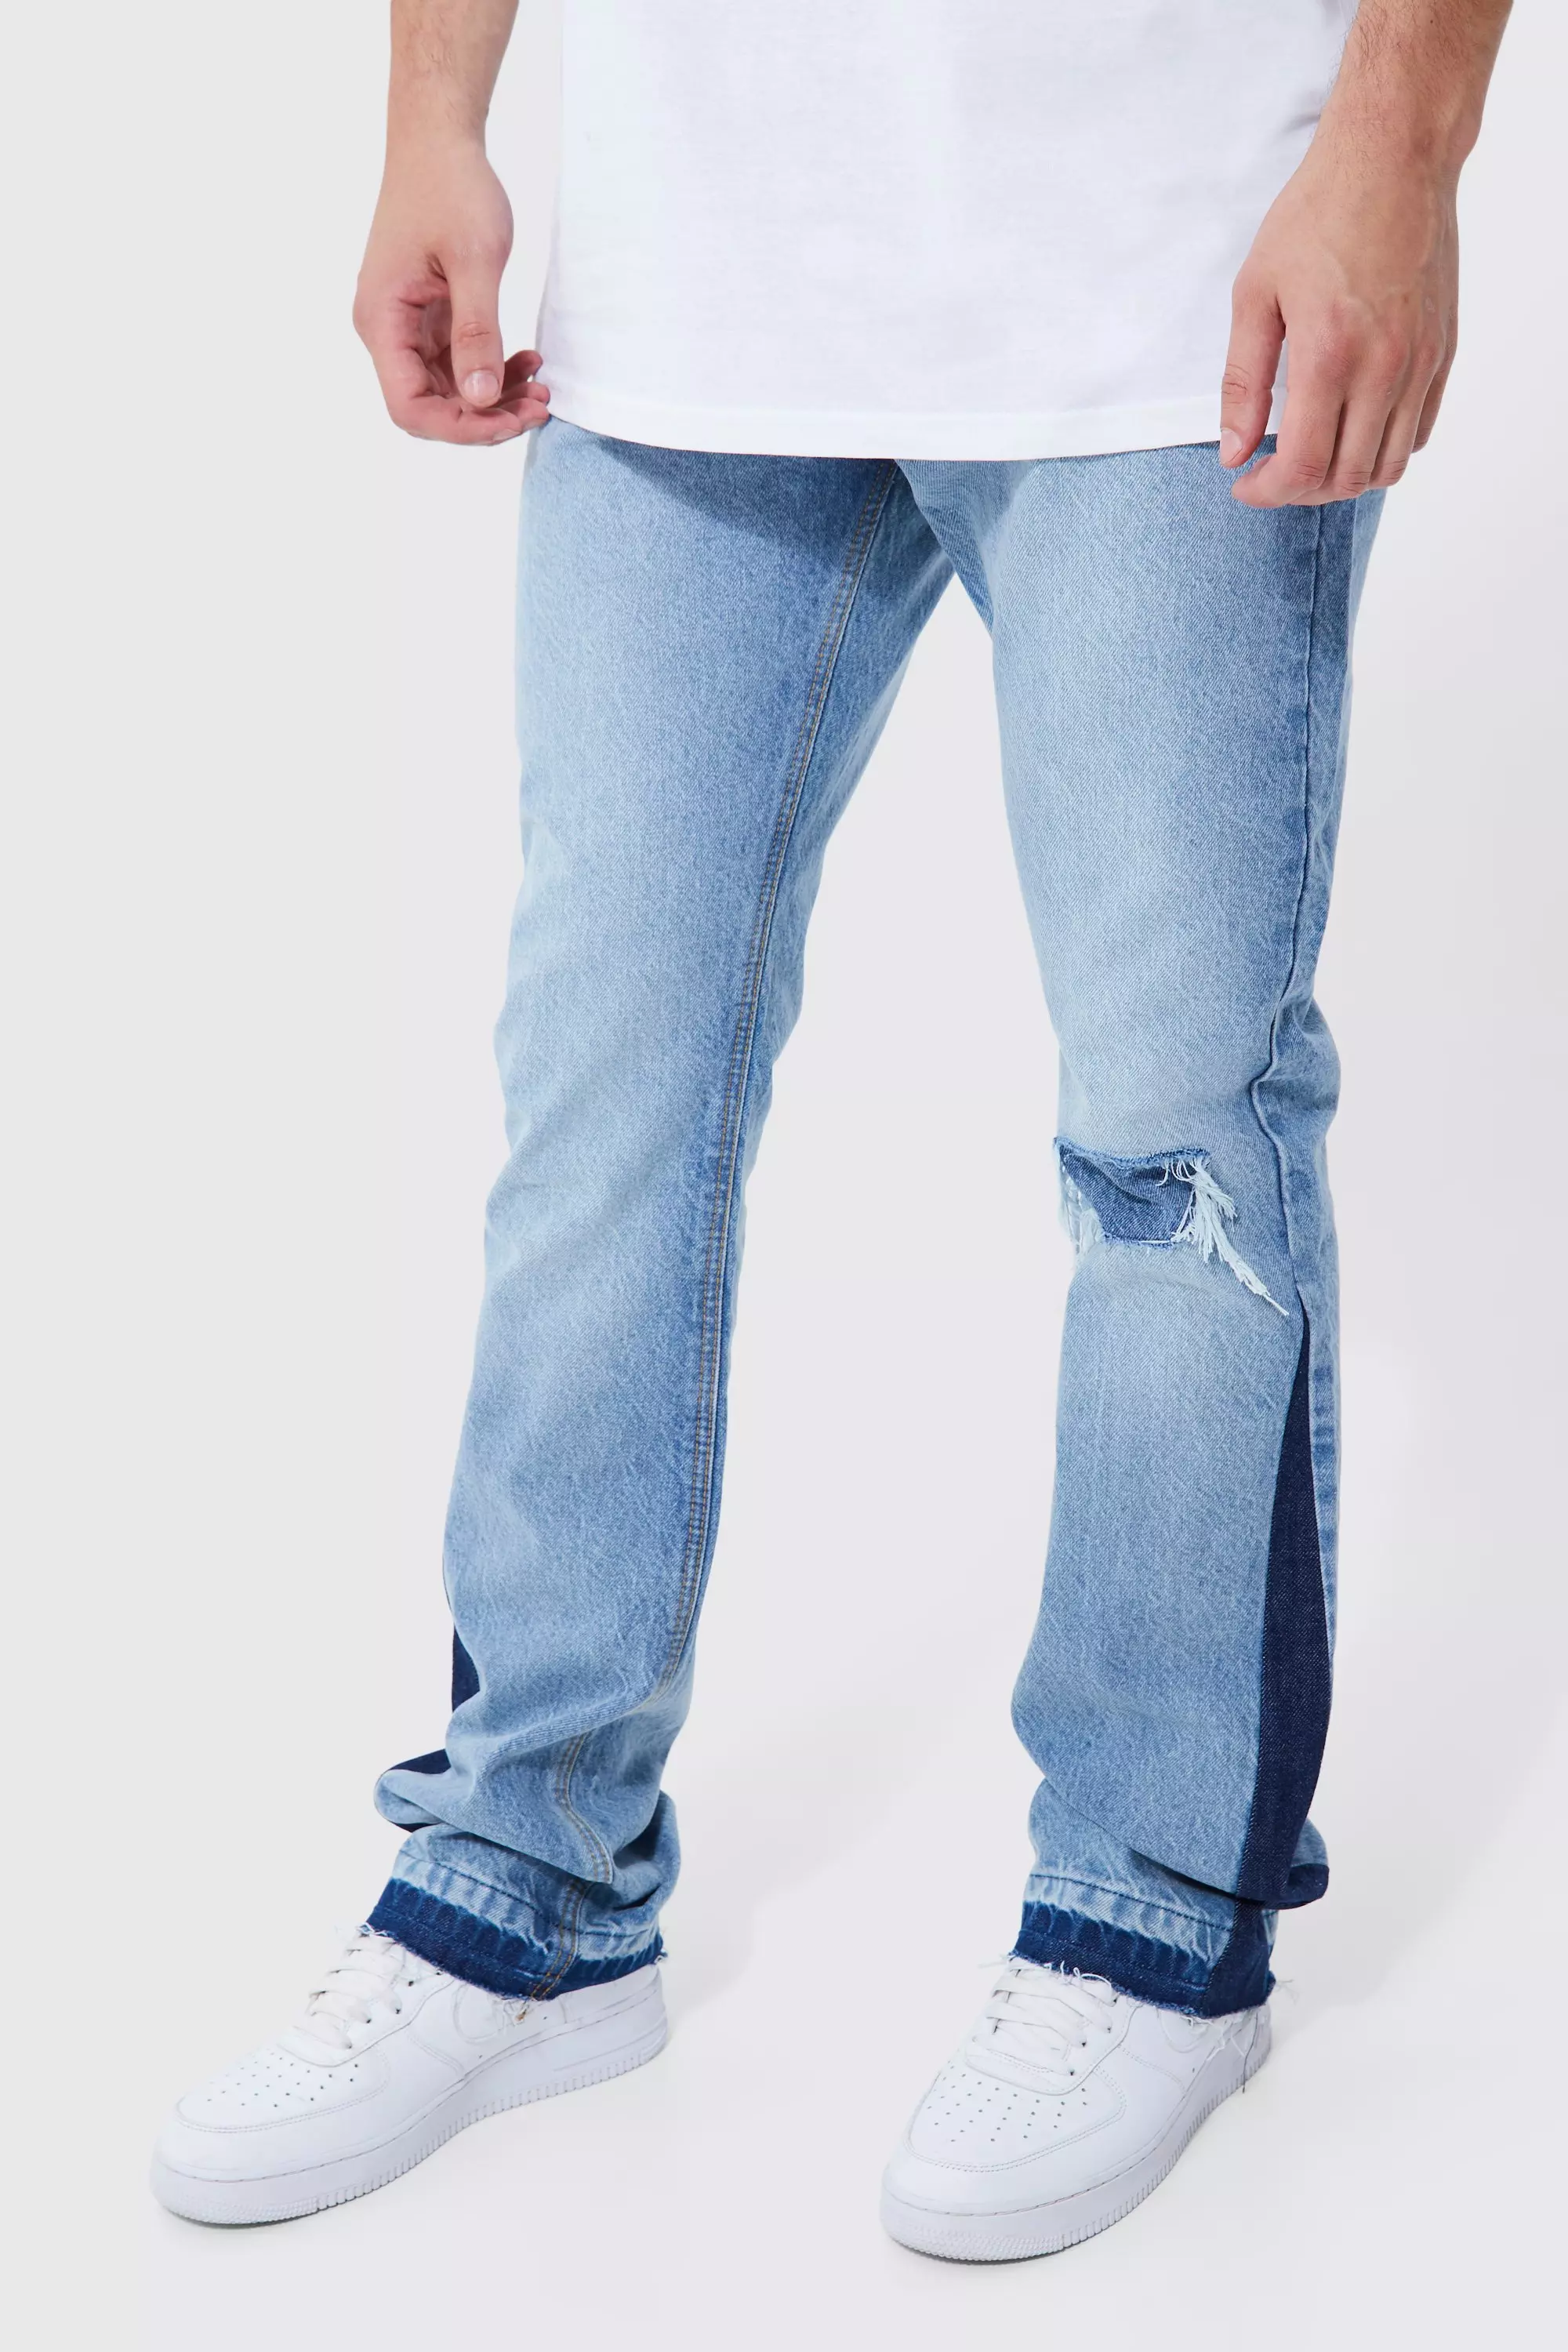 Tall Slim Flare Gusset Detail Ripped Jeans Light blue